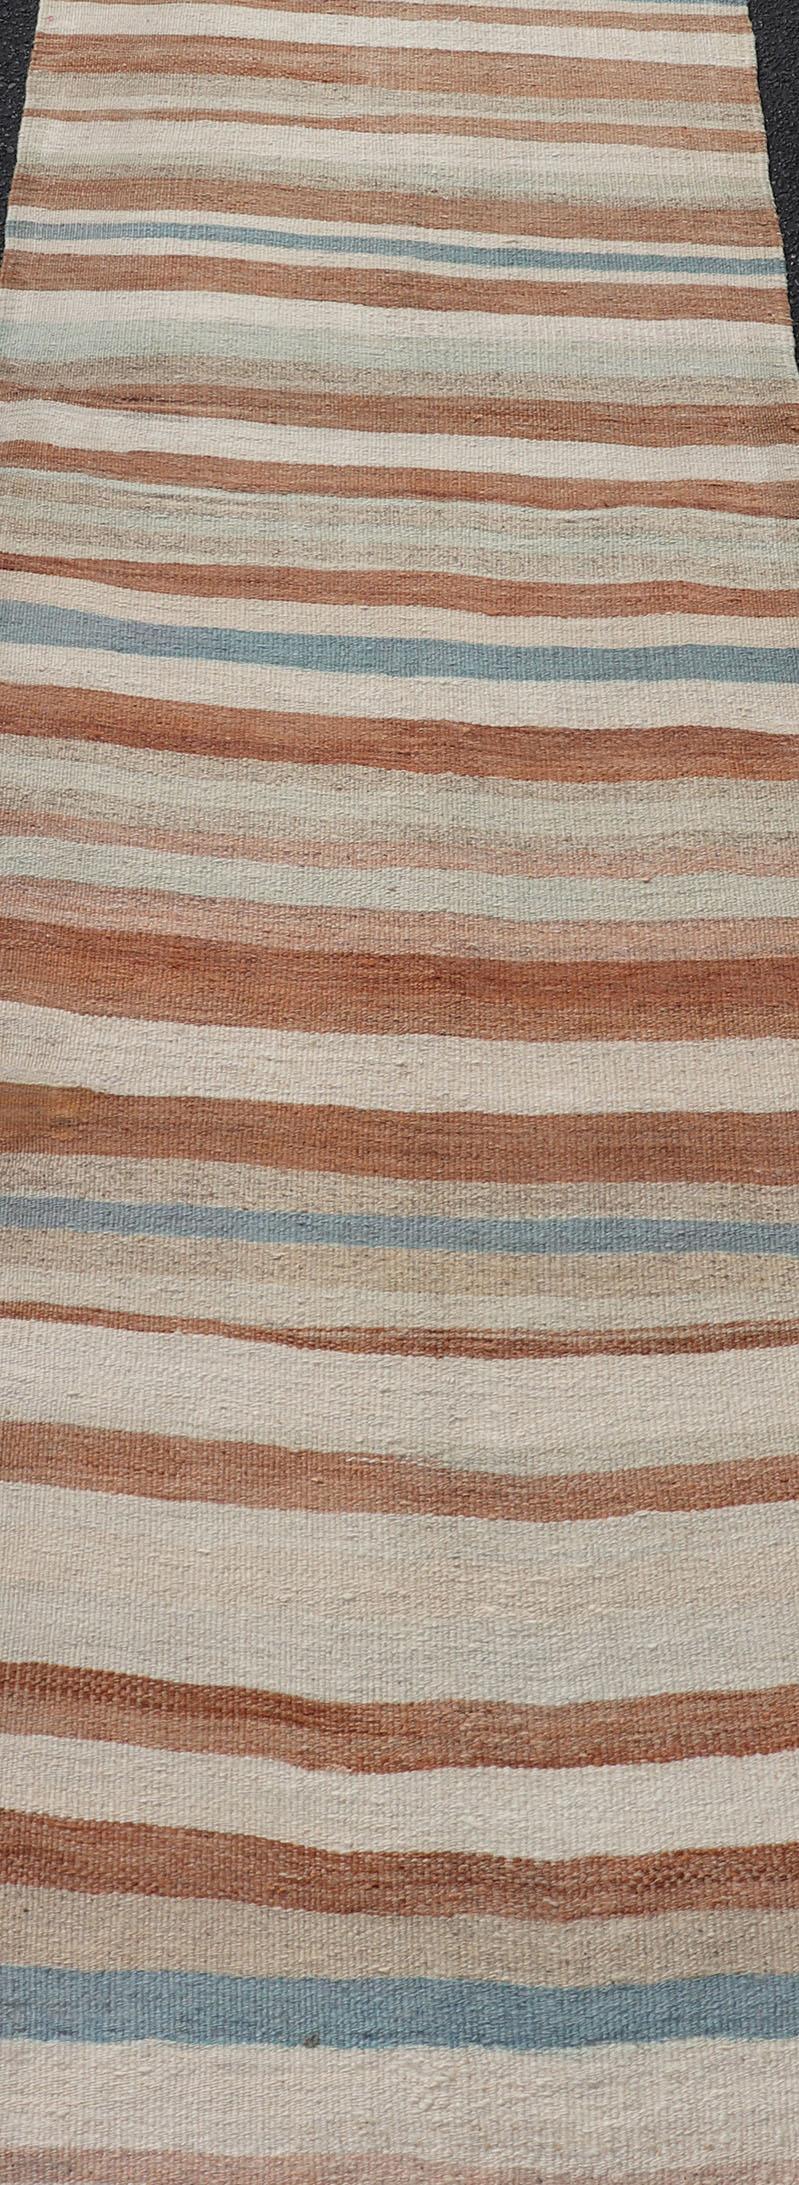 Striped Vintage Turkish Kilim Runner in Shades of Brown, Cream, and Blue For Sale 1